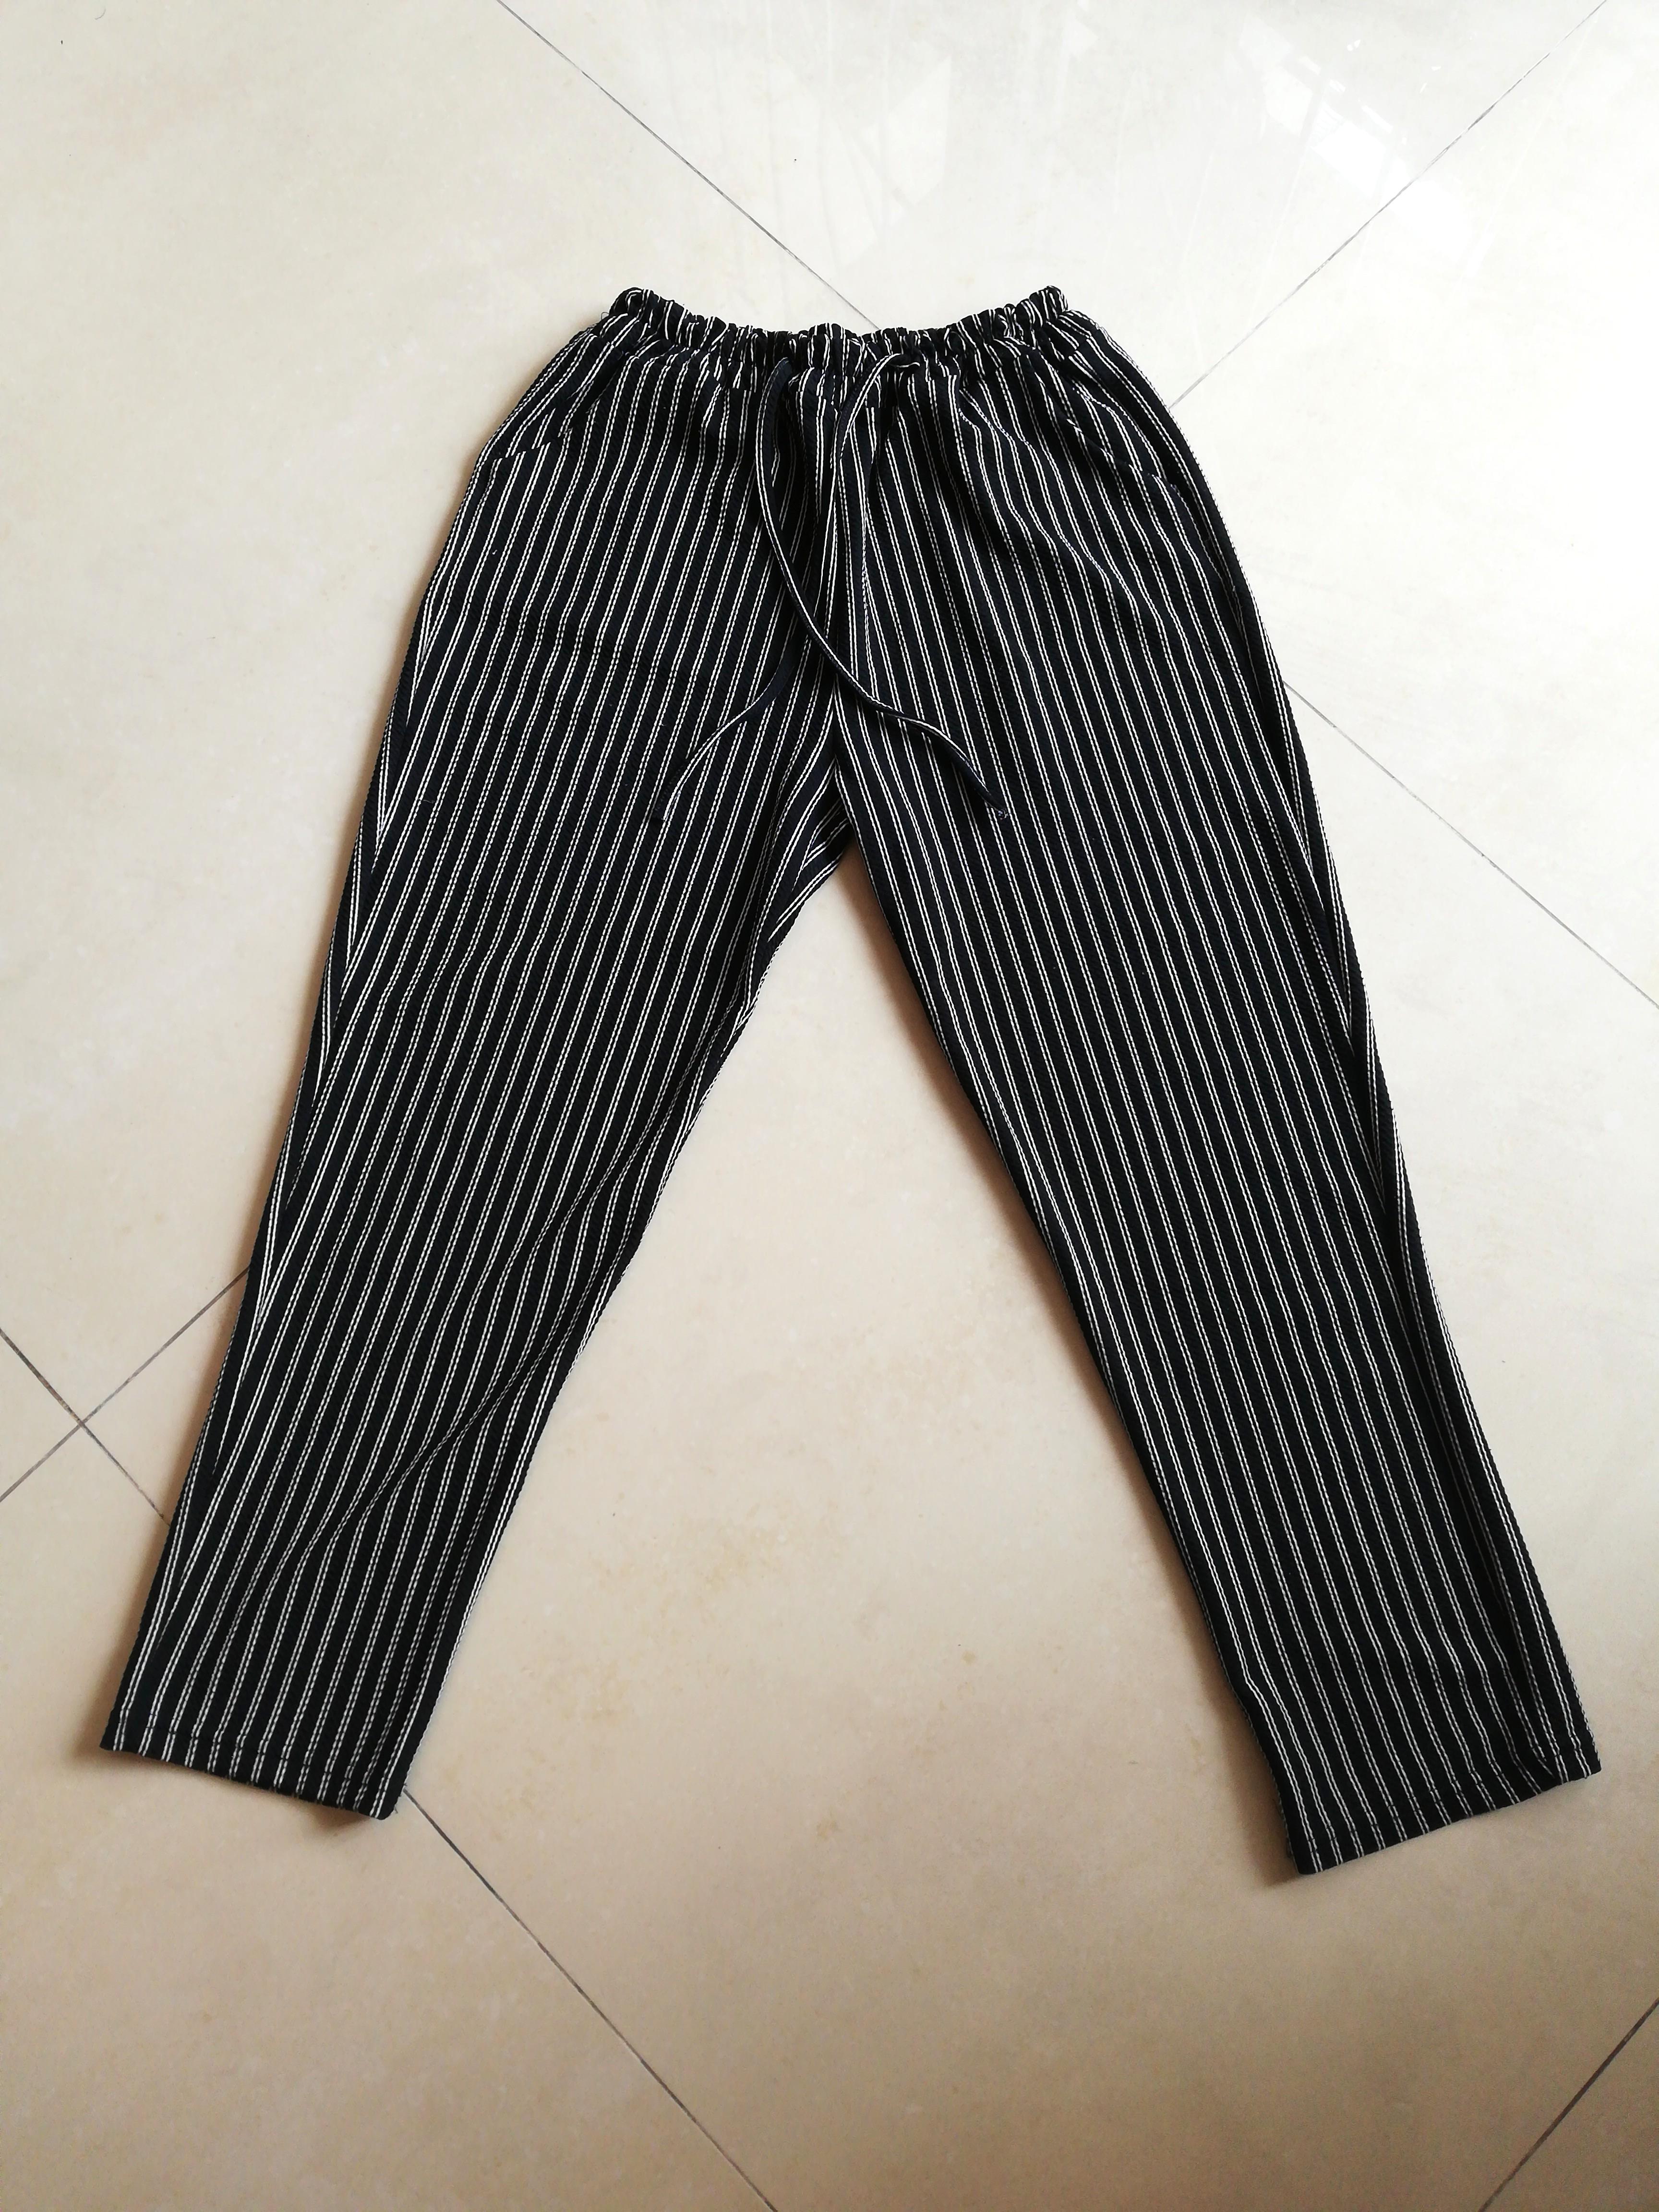 black and white vertical striped pants